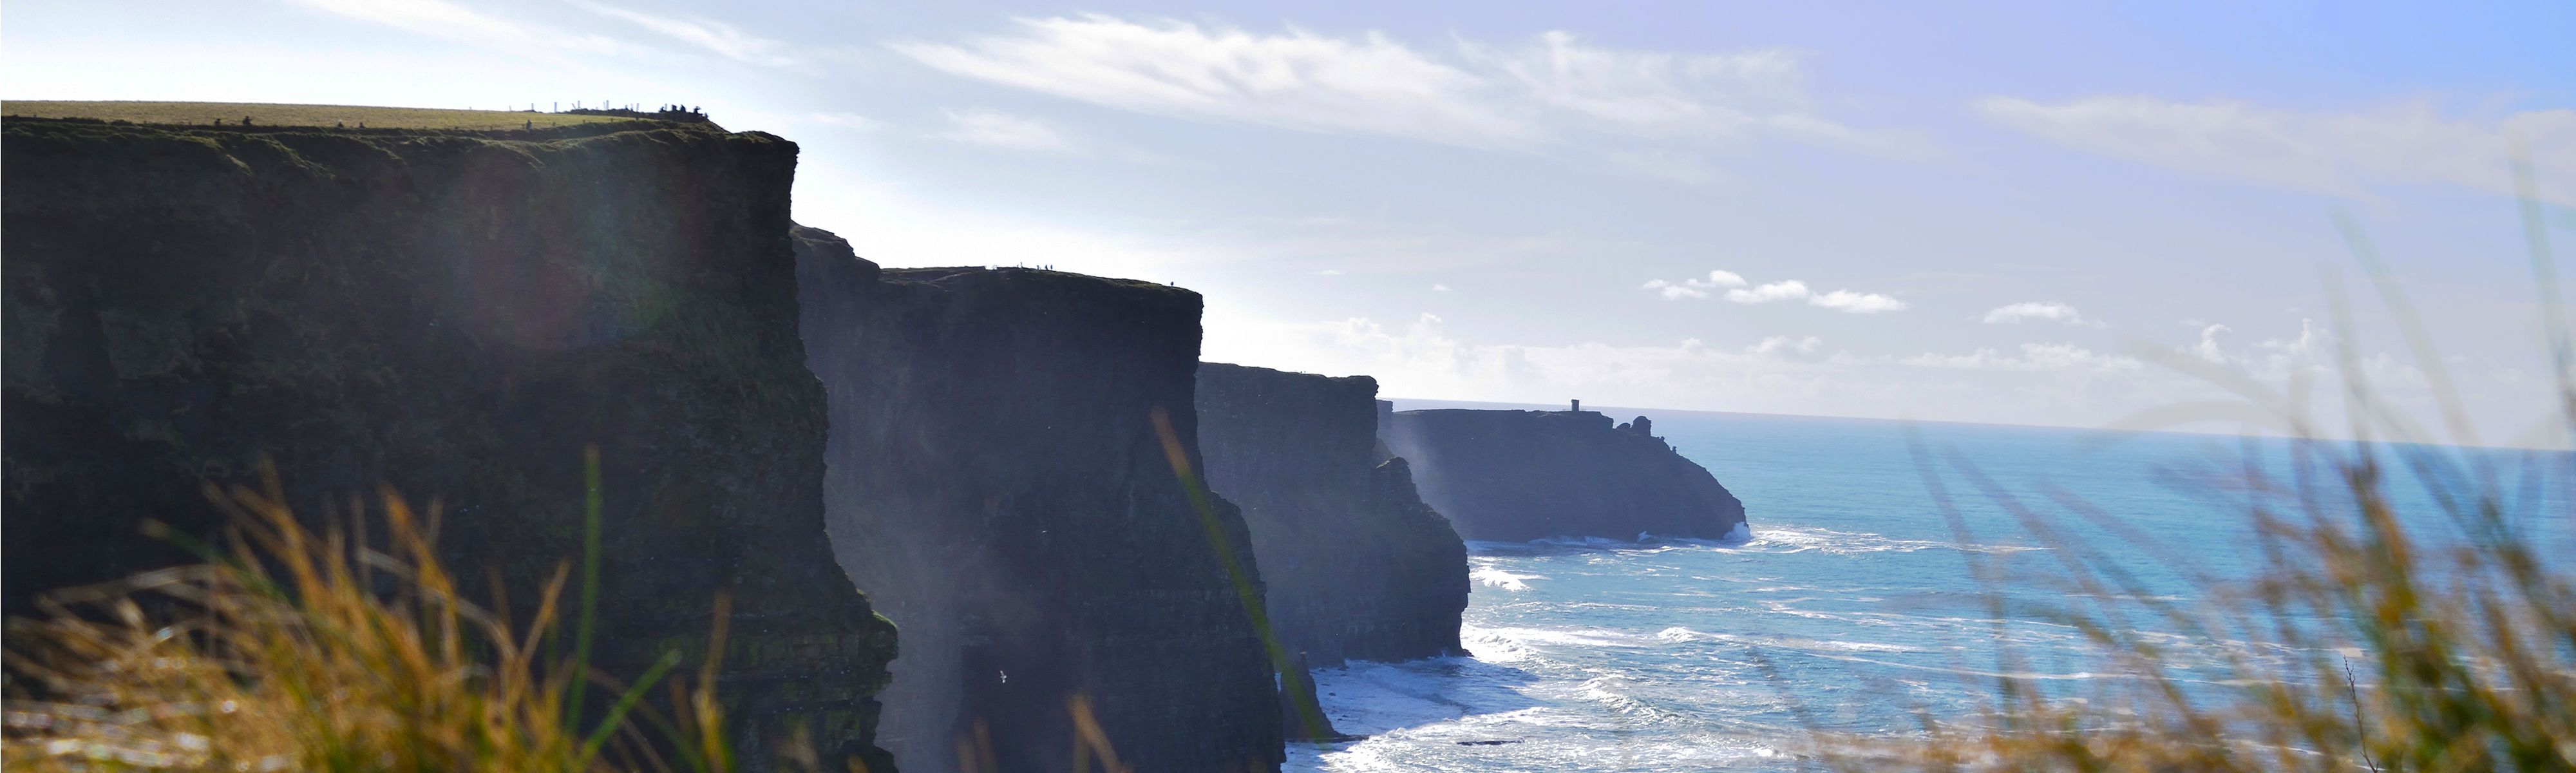 cliffs of moher in galway ireland on a sunny day